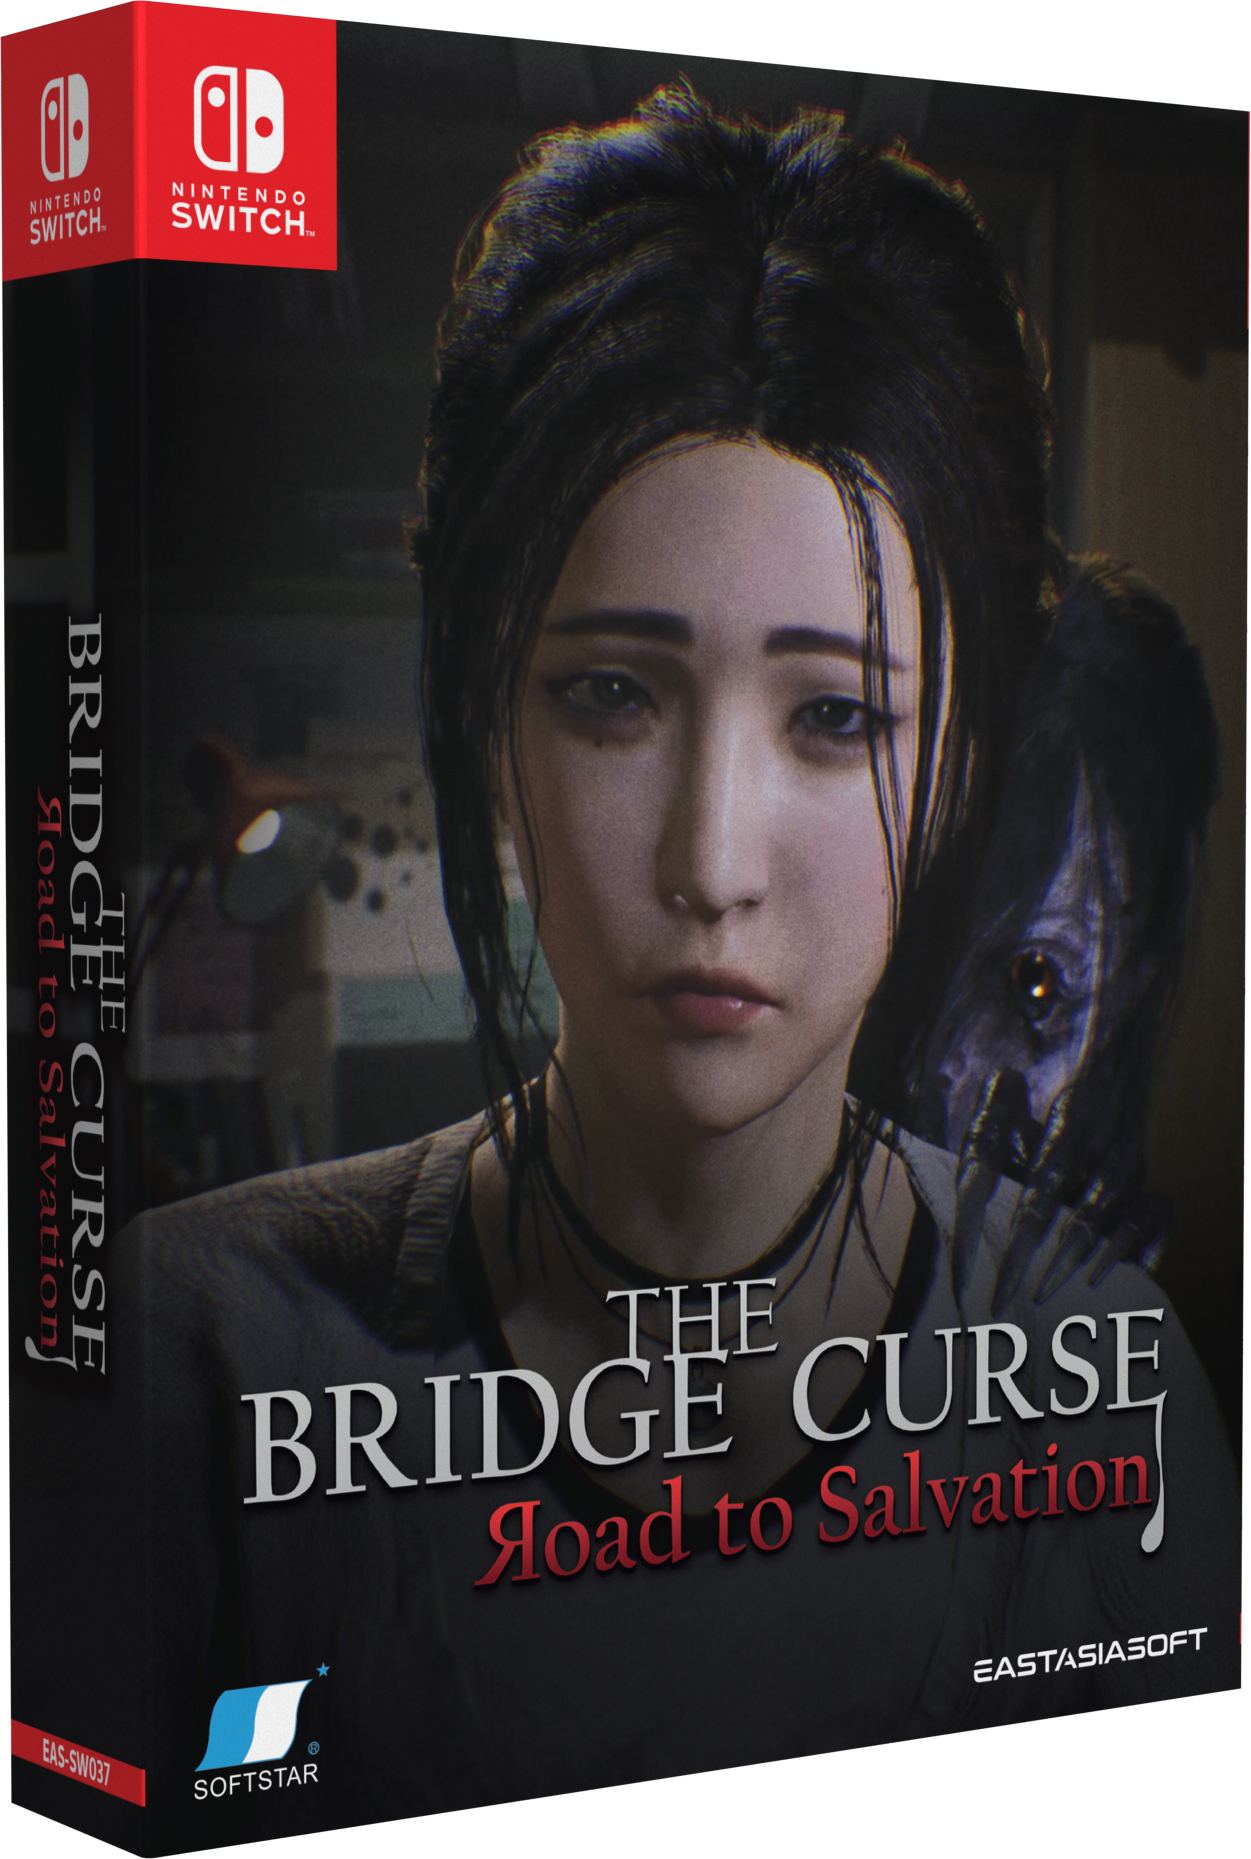 The Bridge Curse: Road to Salvation [Limited Edition] PLAY EXCLUSIVES